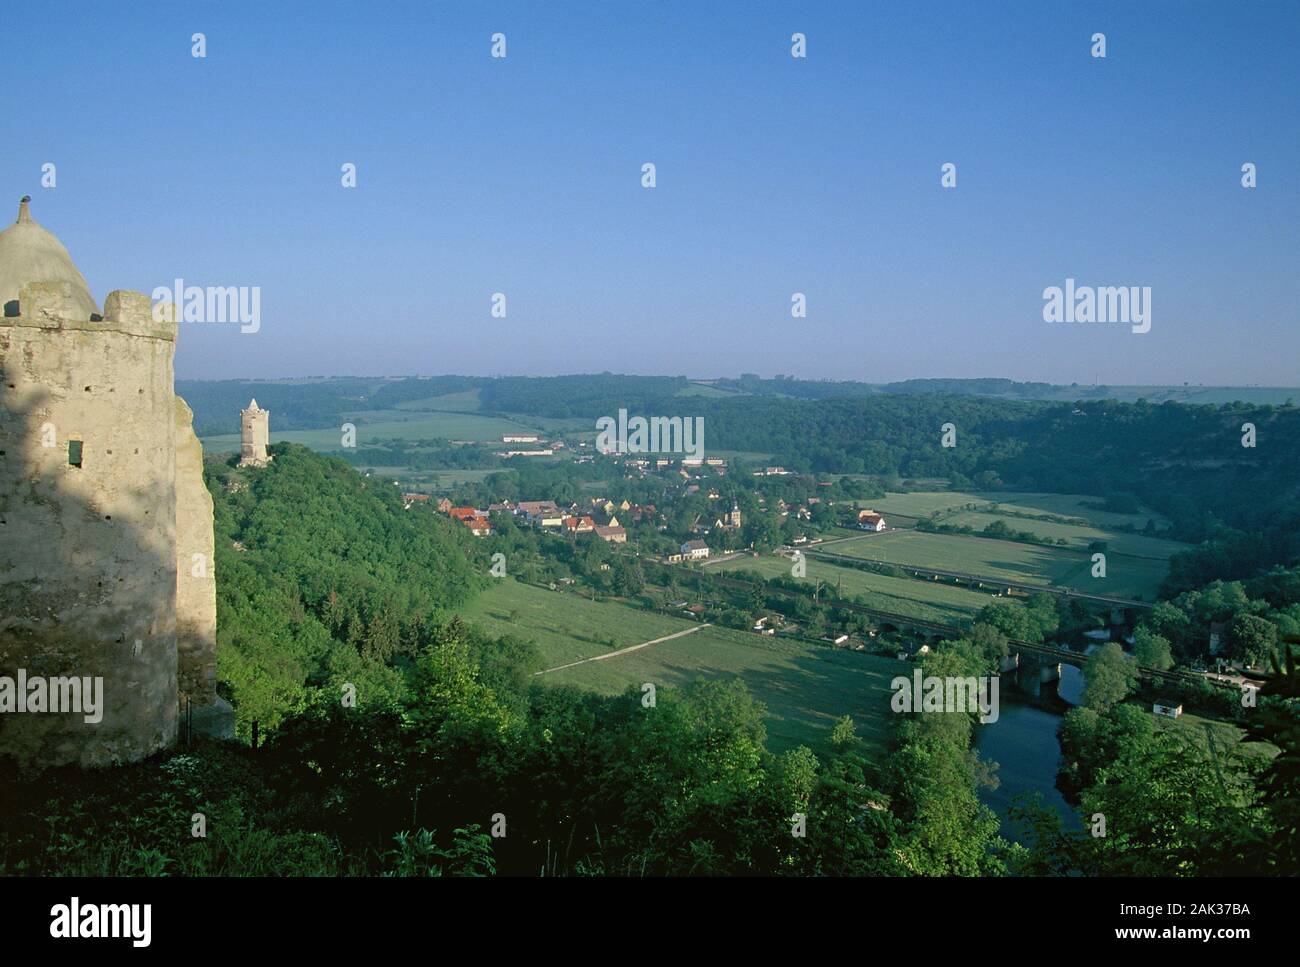 High above the village of Saaleck and the Saale river are the castle ruins of the Rudelsburg and the Saaleck Castle situated on forested hills. Saalec Stock Photo